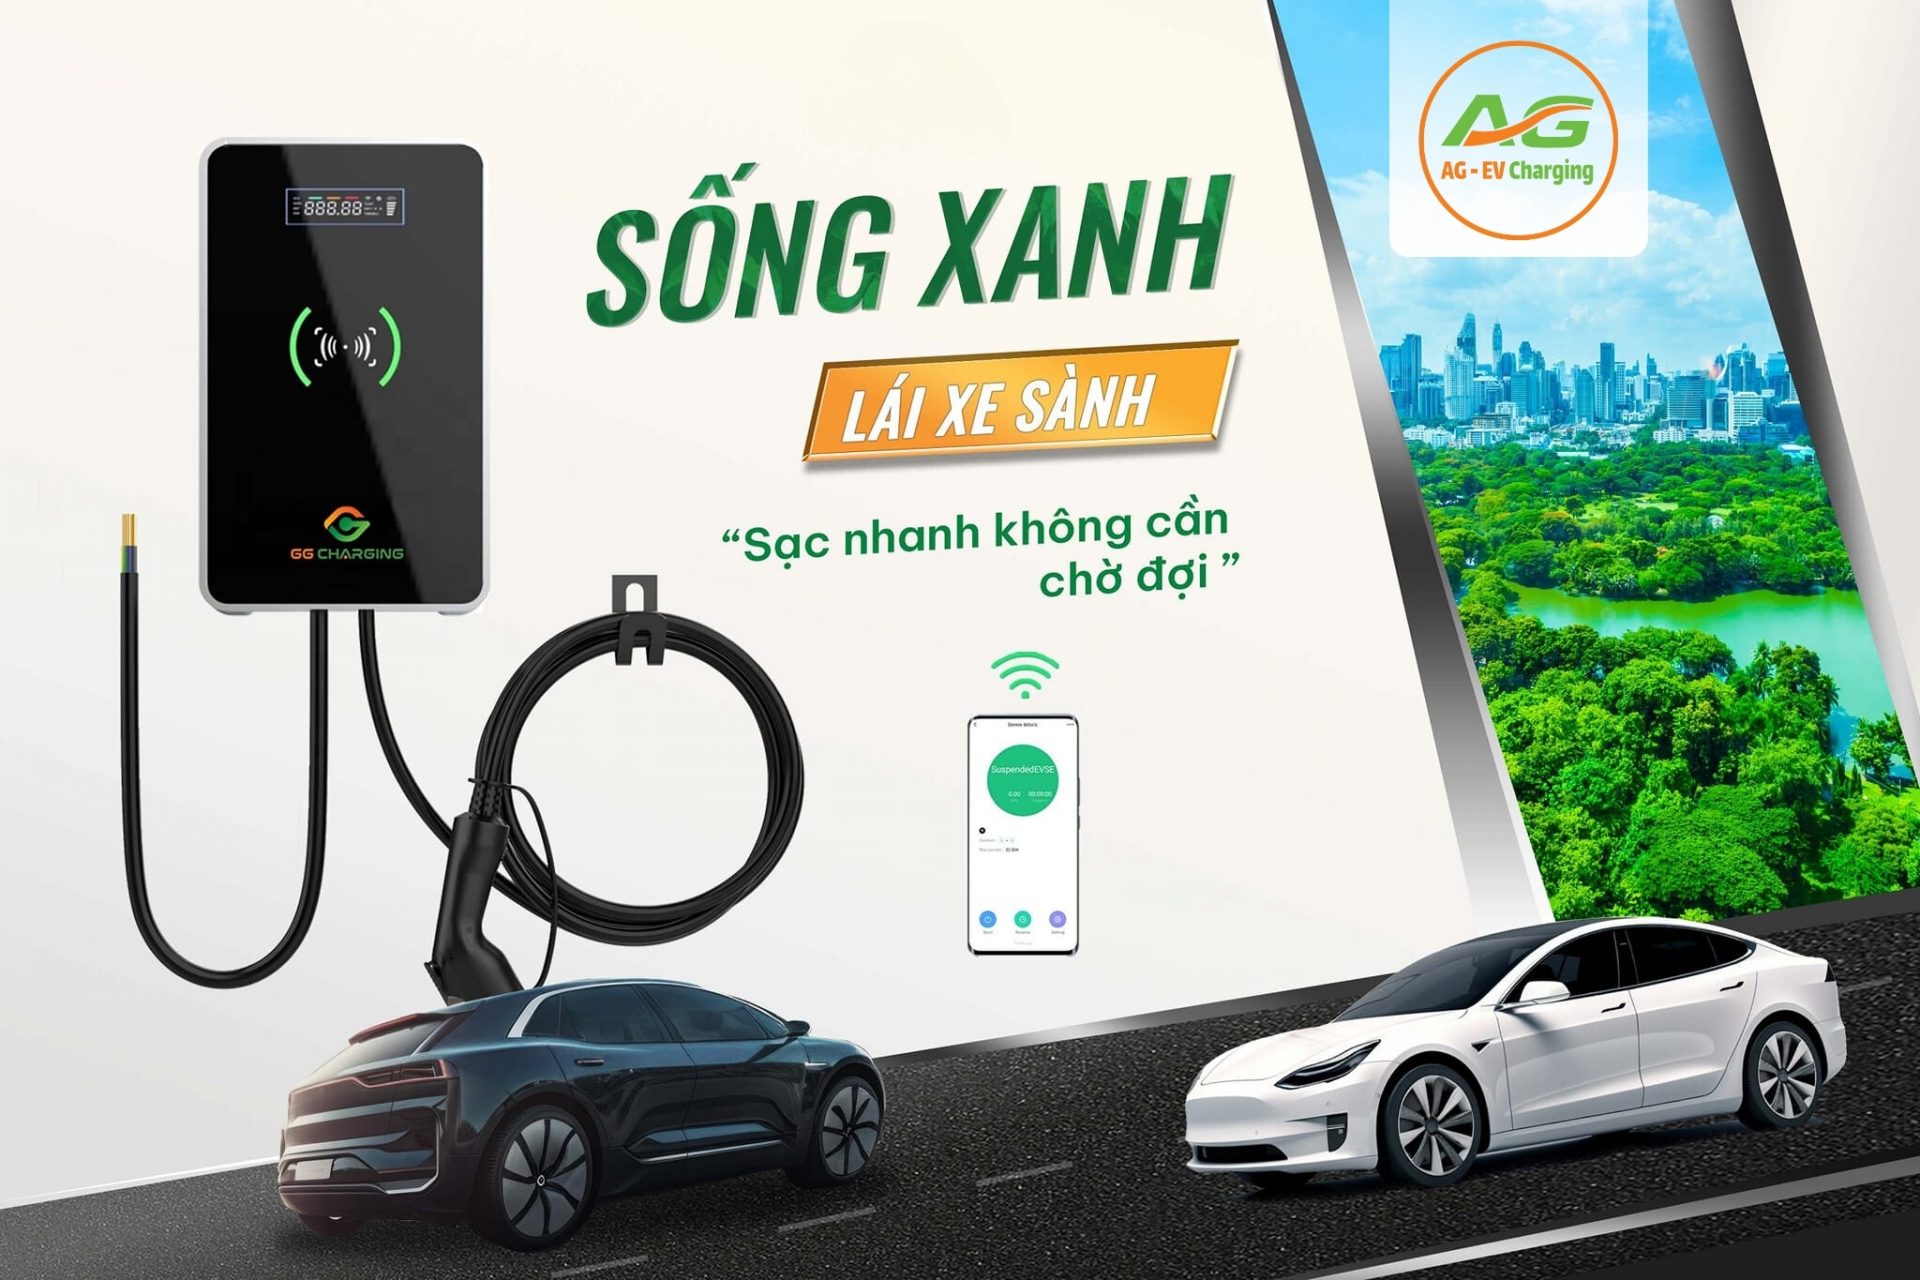 bo-sac-o-to-dien-gia-dinh-gg-charging-7kw-acgg007-1-la-giai-phap-tien-ich-cho-nguoi-dung-o-to-dien